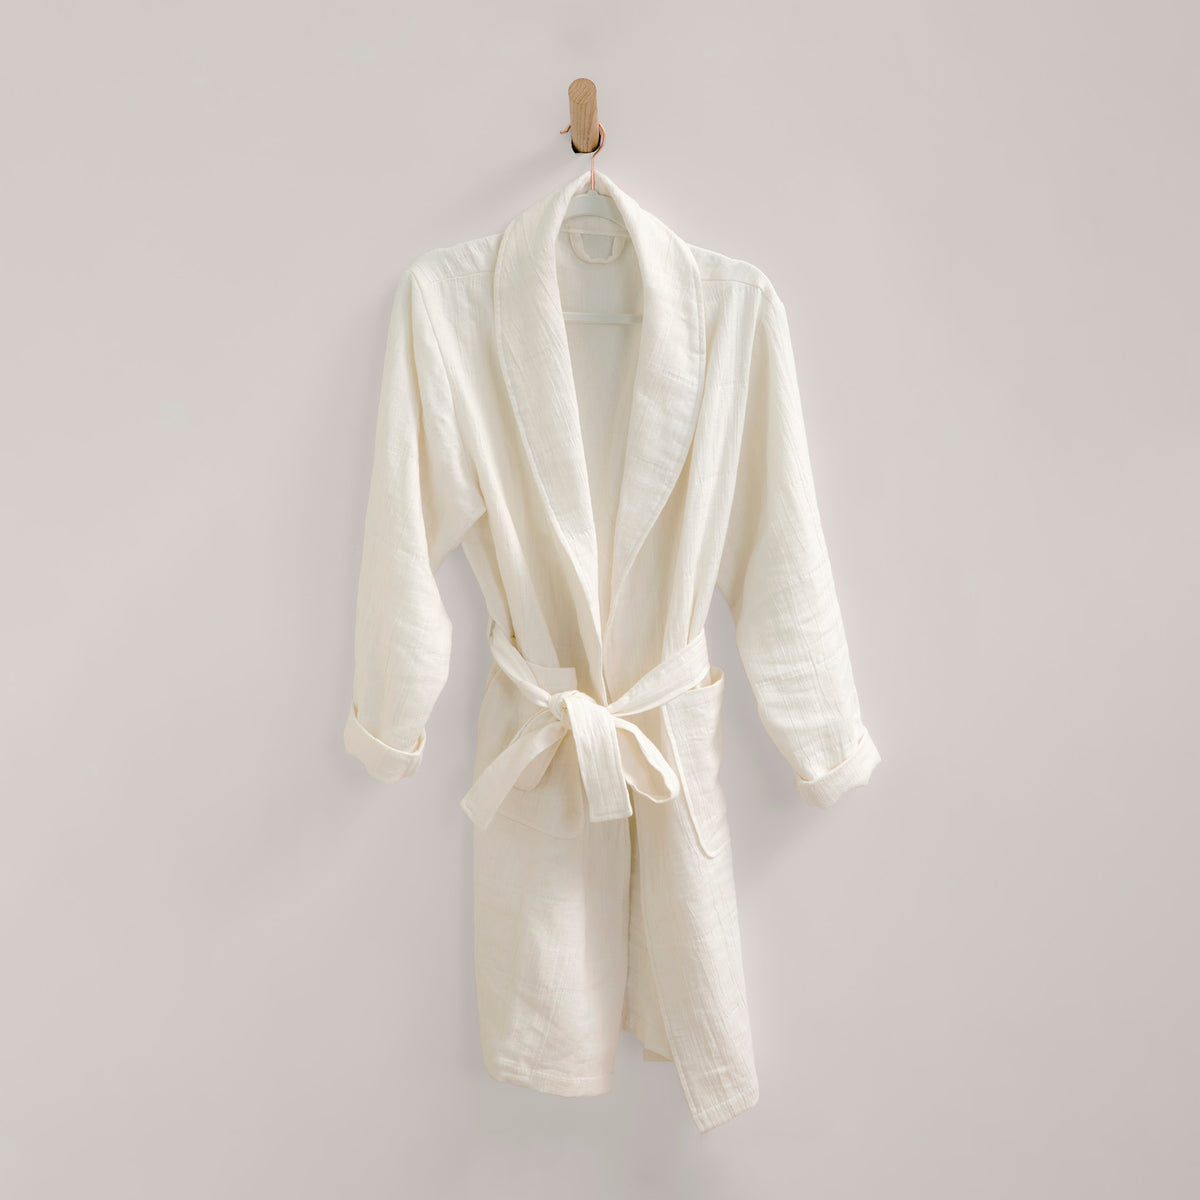 Image of white Featherweight Robe, tied and neatly hanging from a wooden peg on an off-white wall